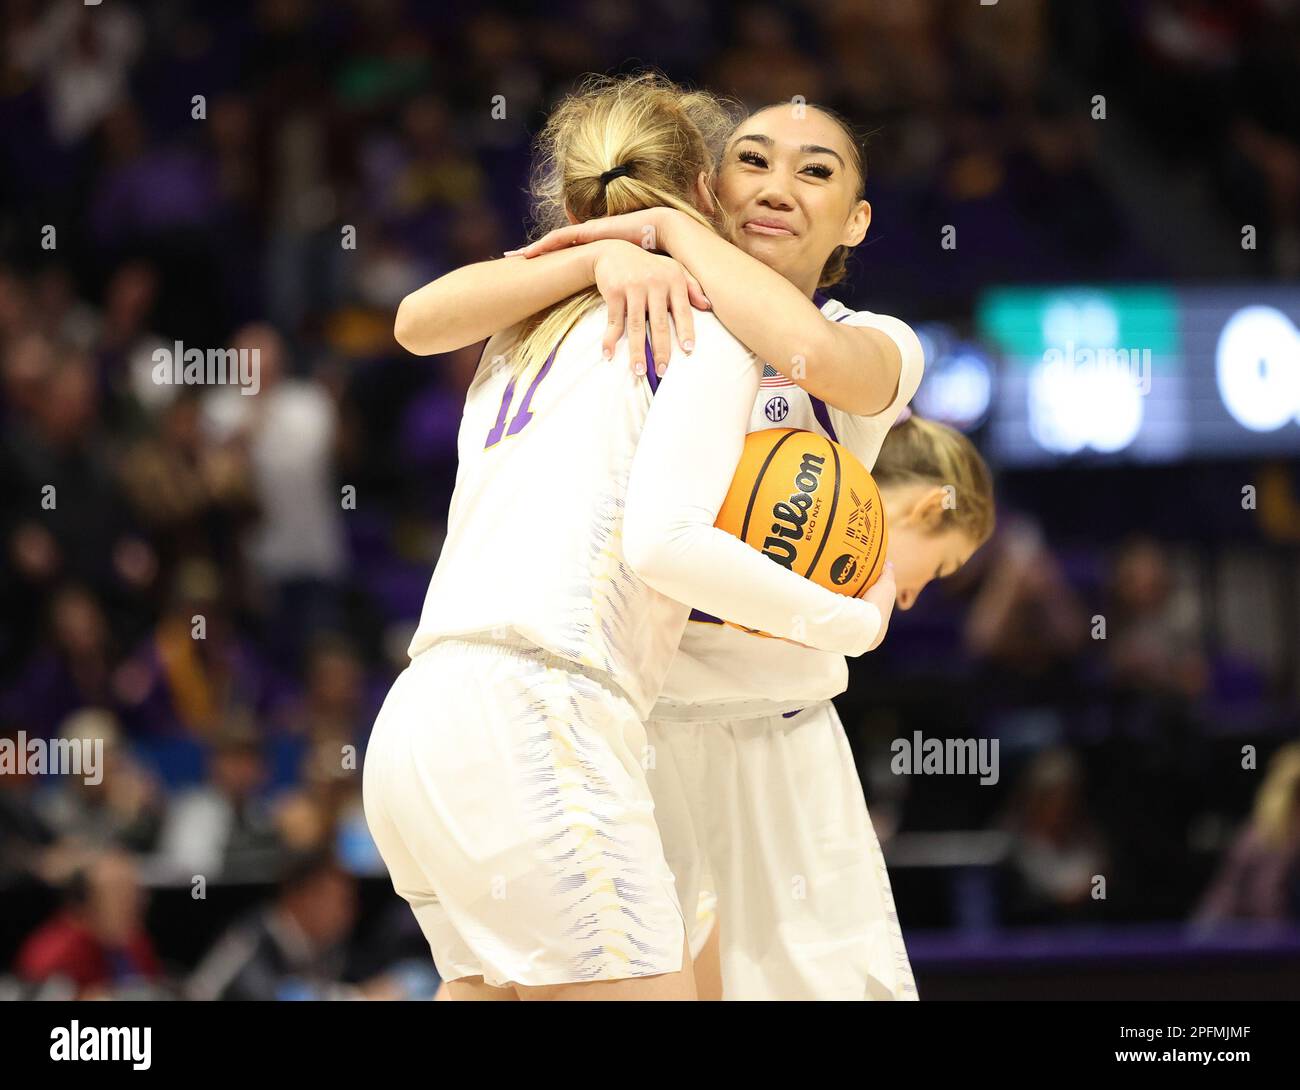 Baton Rouge, USA. 17th Mar, 2023. LSU Tigers forward Emily Ward (11) hugs LSU Tigers guard Last-Tear Poa (13) at the end of their first round game against Hawai'i Rainbow Wahine in the Women's Basketball NCAA Tournament at the Pete Maravich Assembly Center in Baton Rouge, Louisiana on Friday, March 17, 2023. (Photo by Peter G. Forest/Sipa USA) Credit: Sipa USA/Alamy Live News Stock Photo